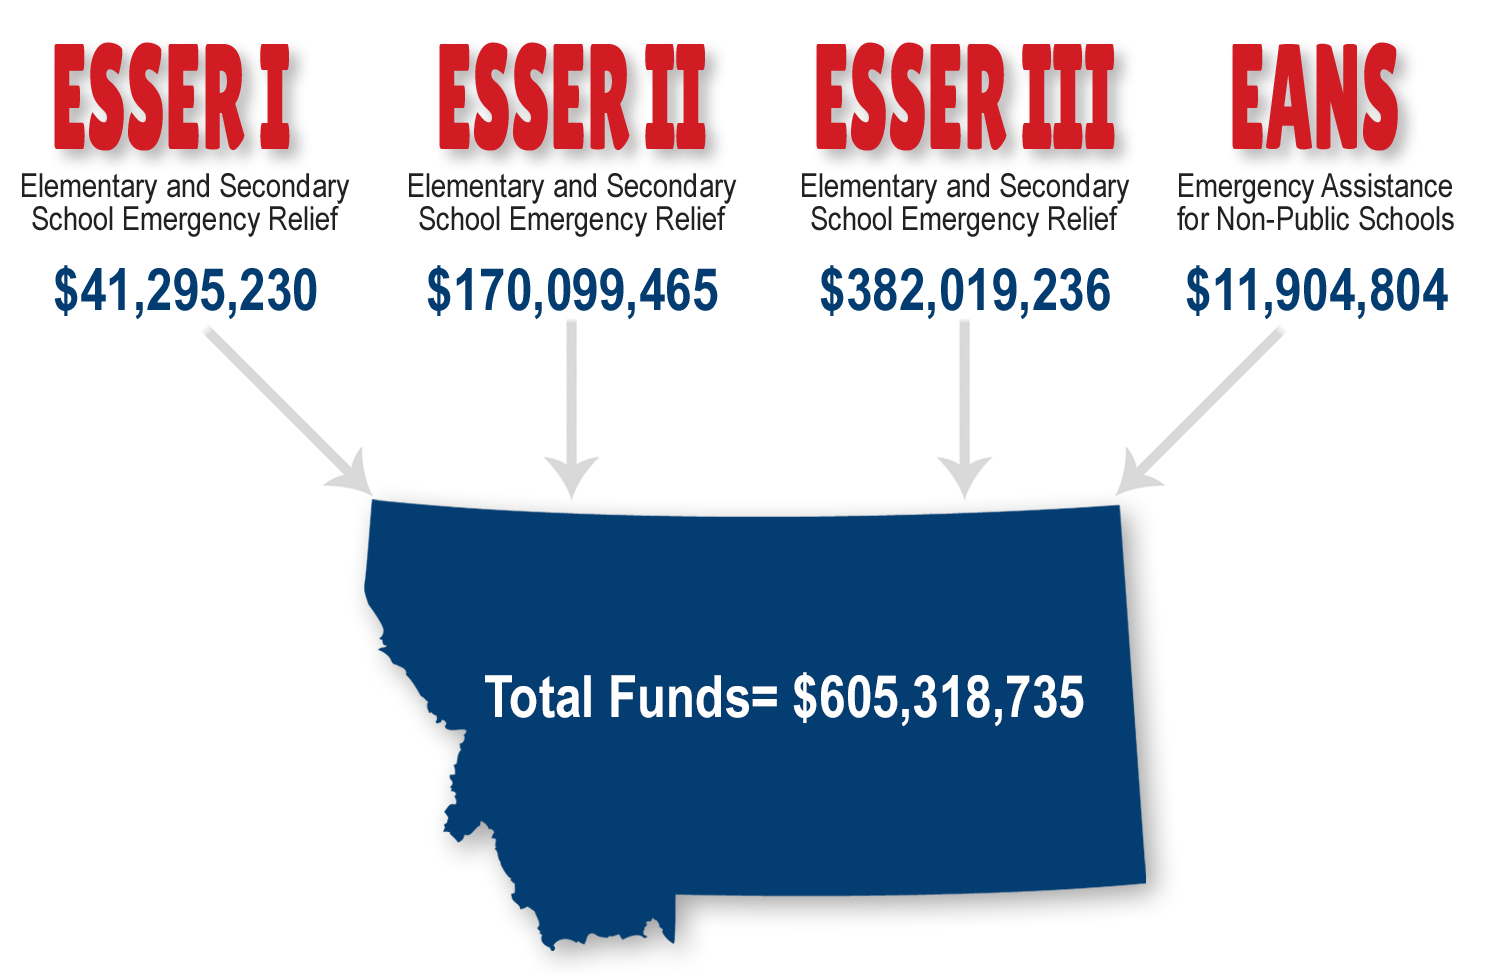 COVID-Related Funding Received for Public and Non-Public Schools Graphic: Elementary and Secondary School Emergency Relief (ESSER) I = $41,295,230; ESSER II = $170,099,465; ESSER III = $382,019,236; Emergency Assistance for Non-Public Schools (EANS) = $24,679,709; Total Funds = $618,093,640